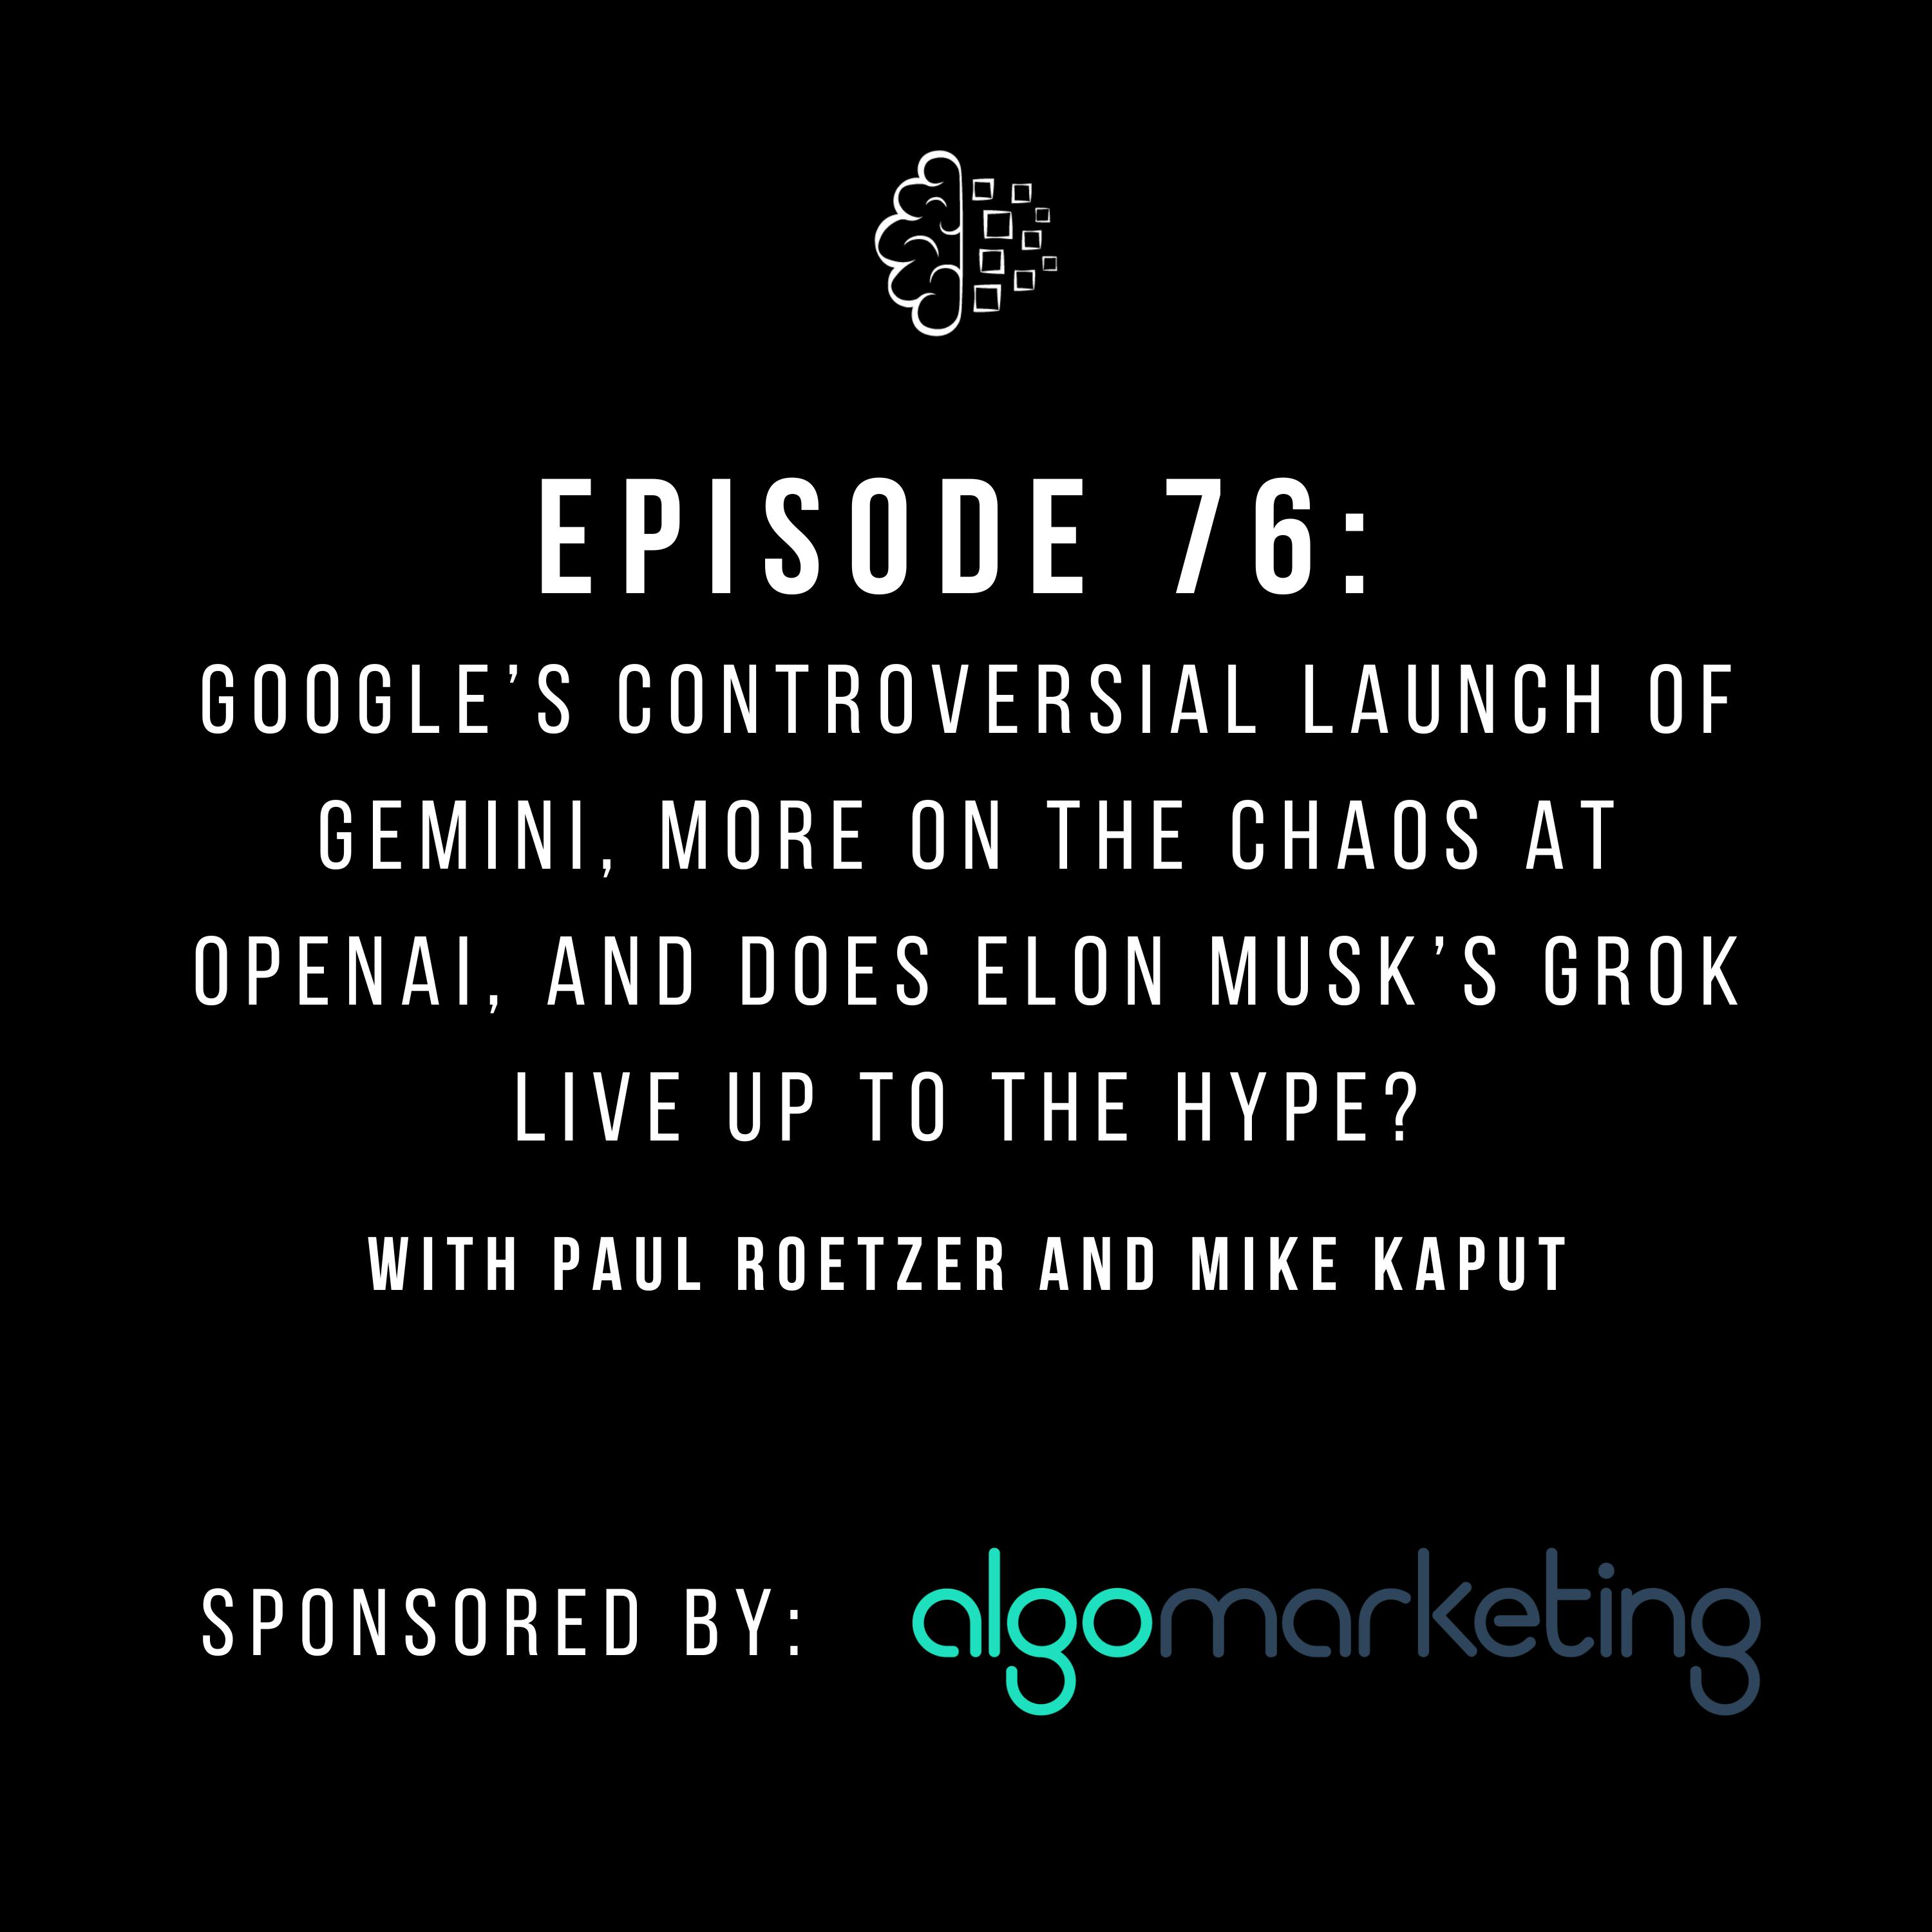 #76: Google’s Controversial Launch of Gemini, More on the Chaos at OpenAI, and Does Elon Musk’s Grok Live Up to the Hype?